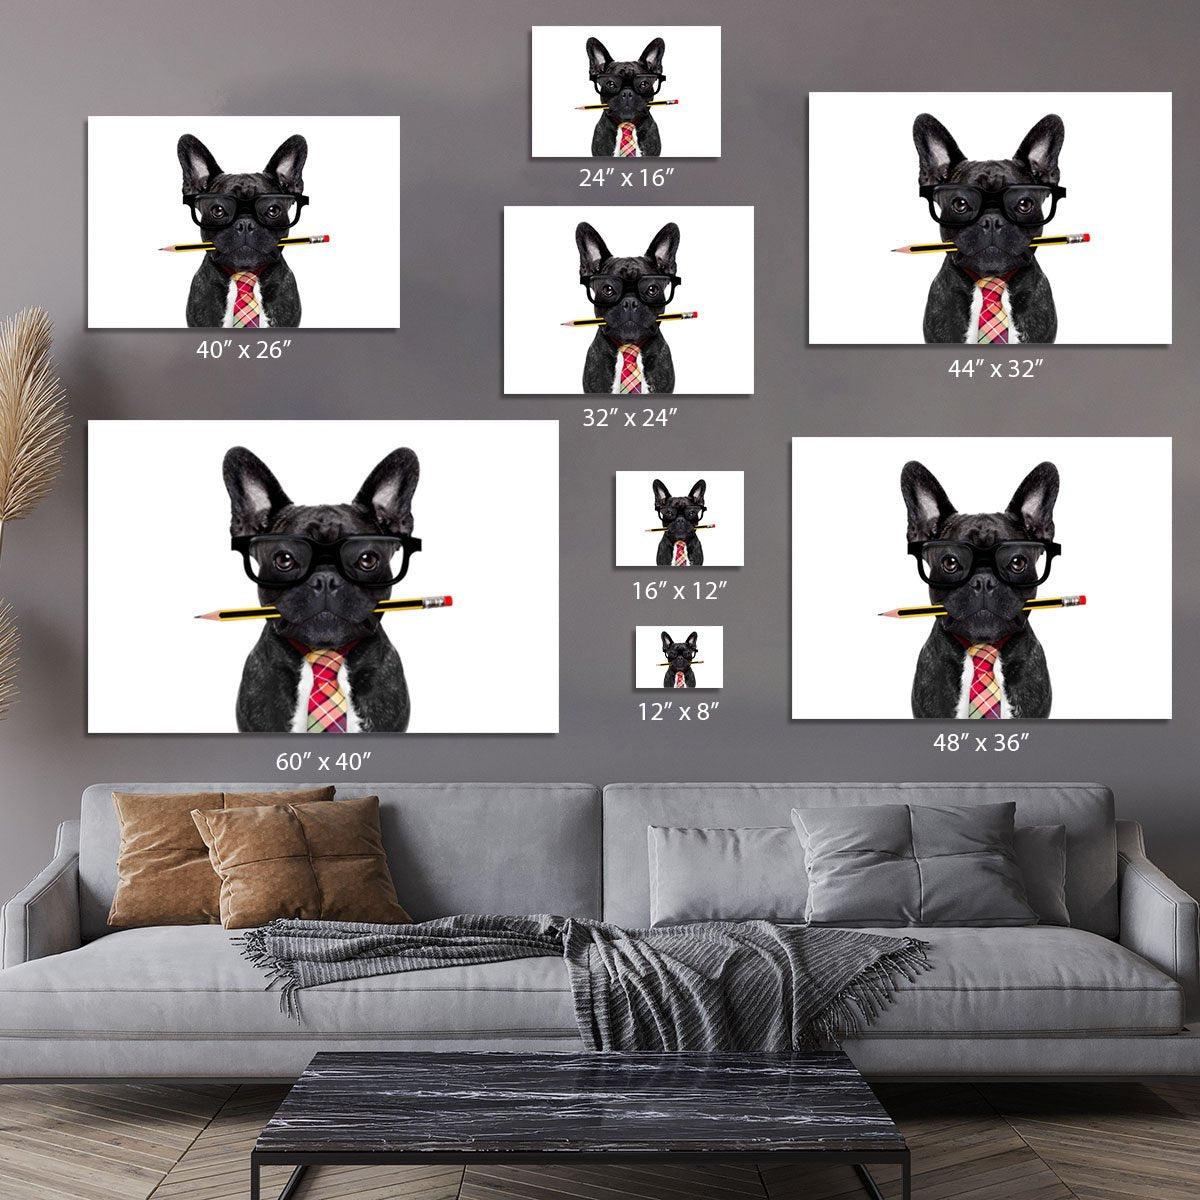 Office businessman french bulldog dog with pen Canvas Print or Poster